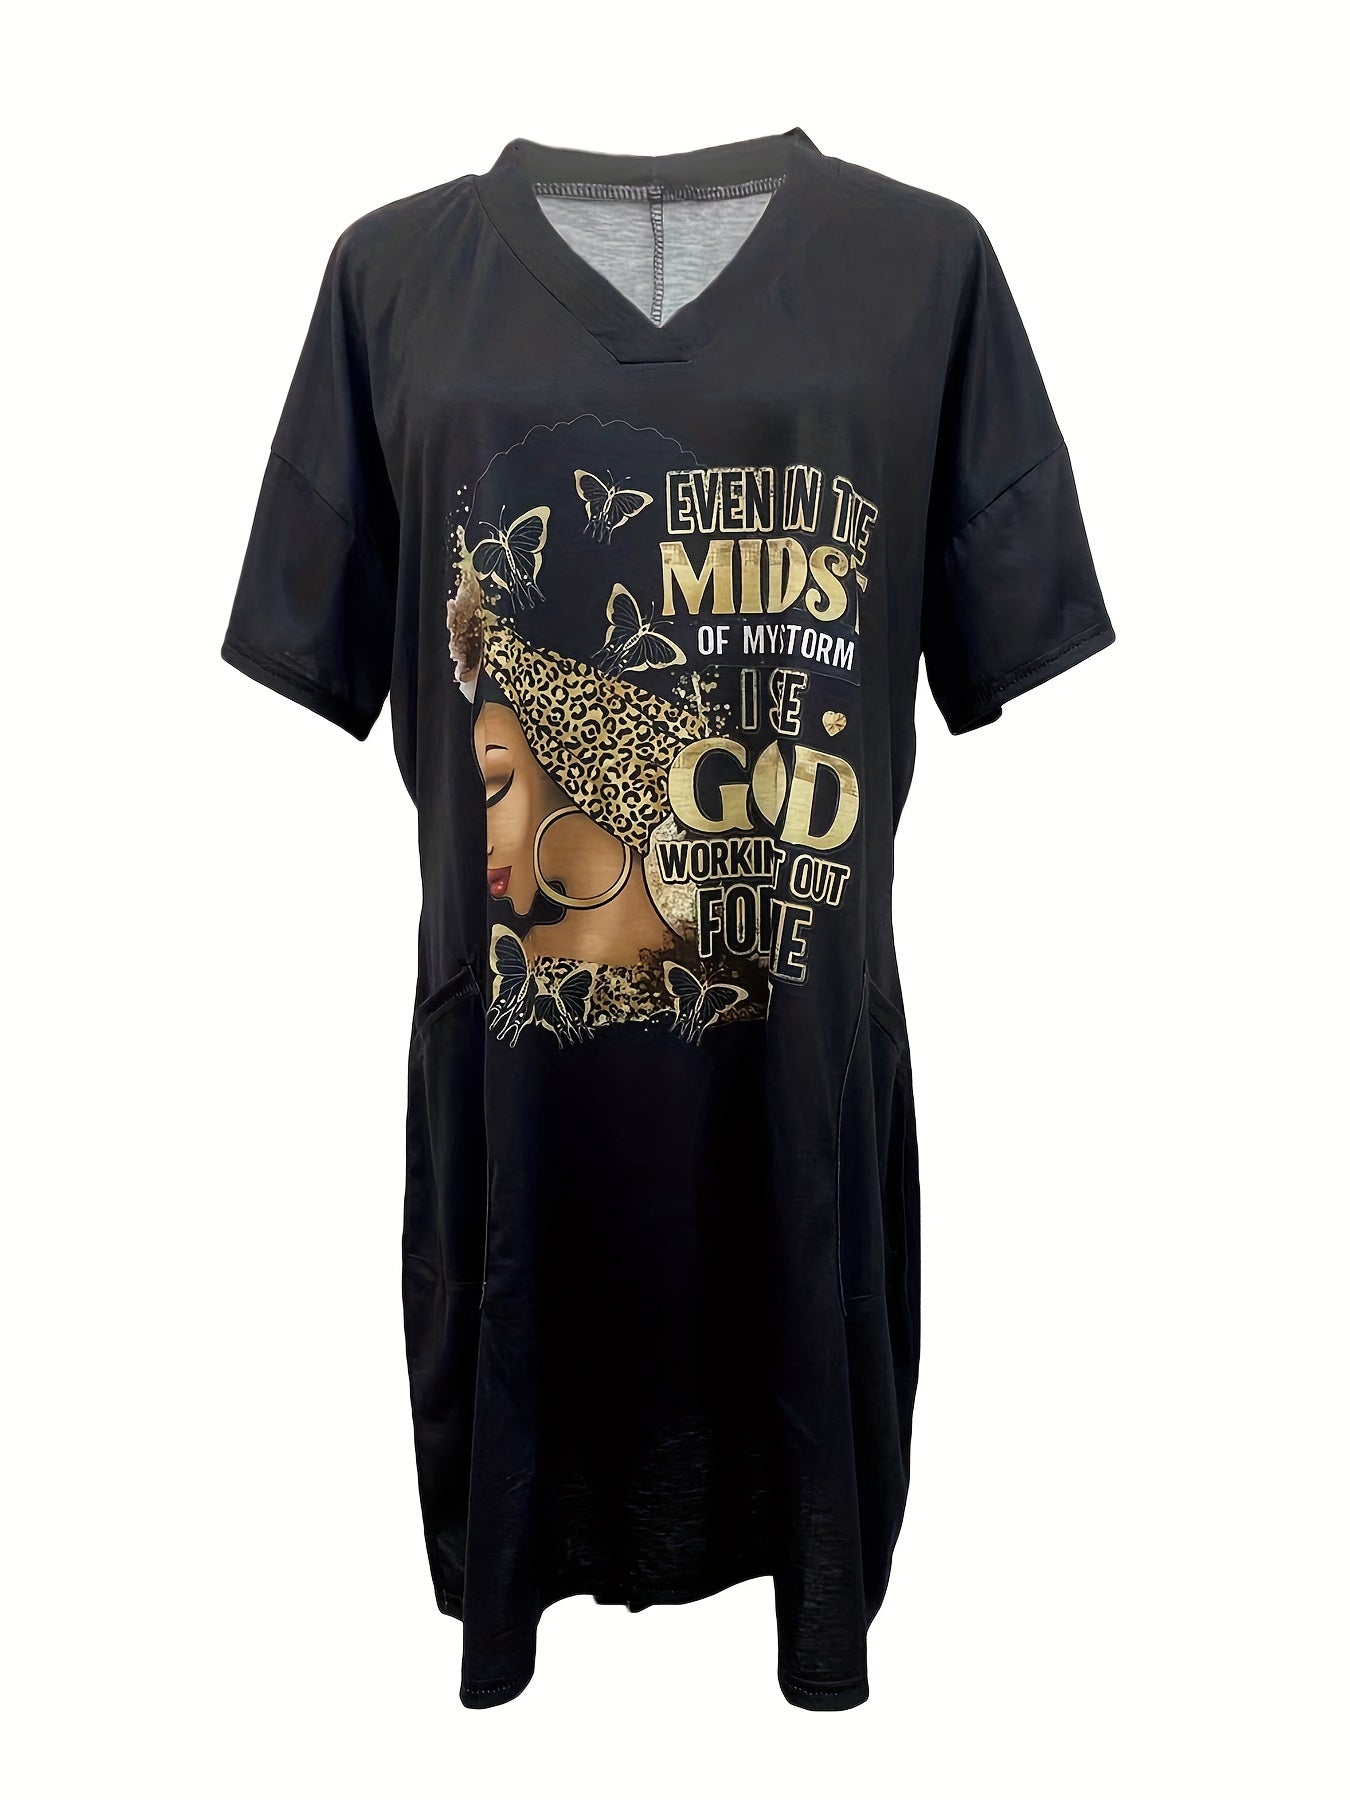 Even In The Midst Of The Storm I See God Working It Out For Me Women's Christian Casual Dress claimedbygoddesigns